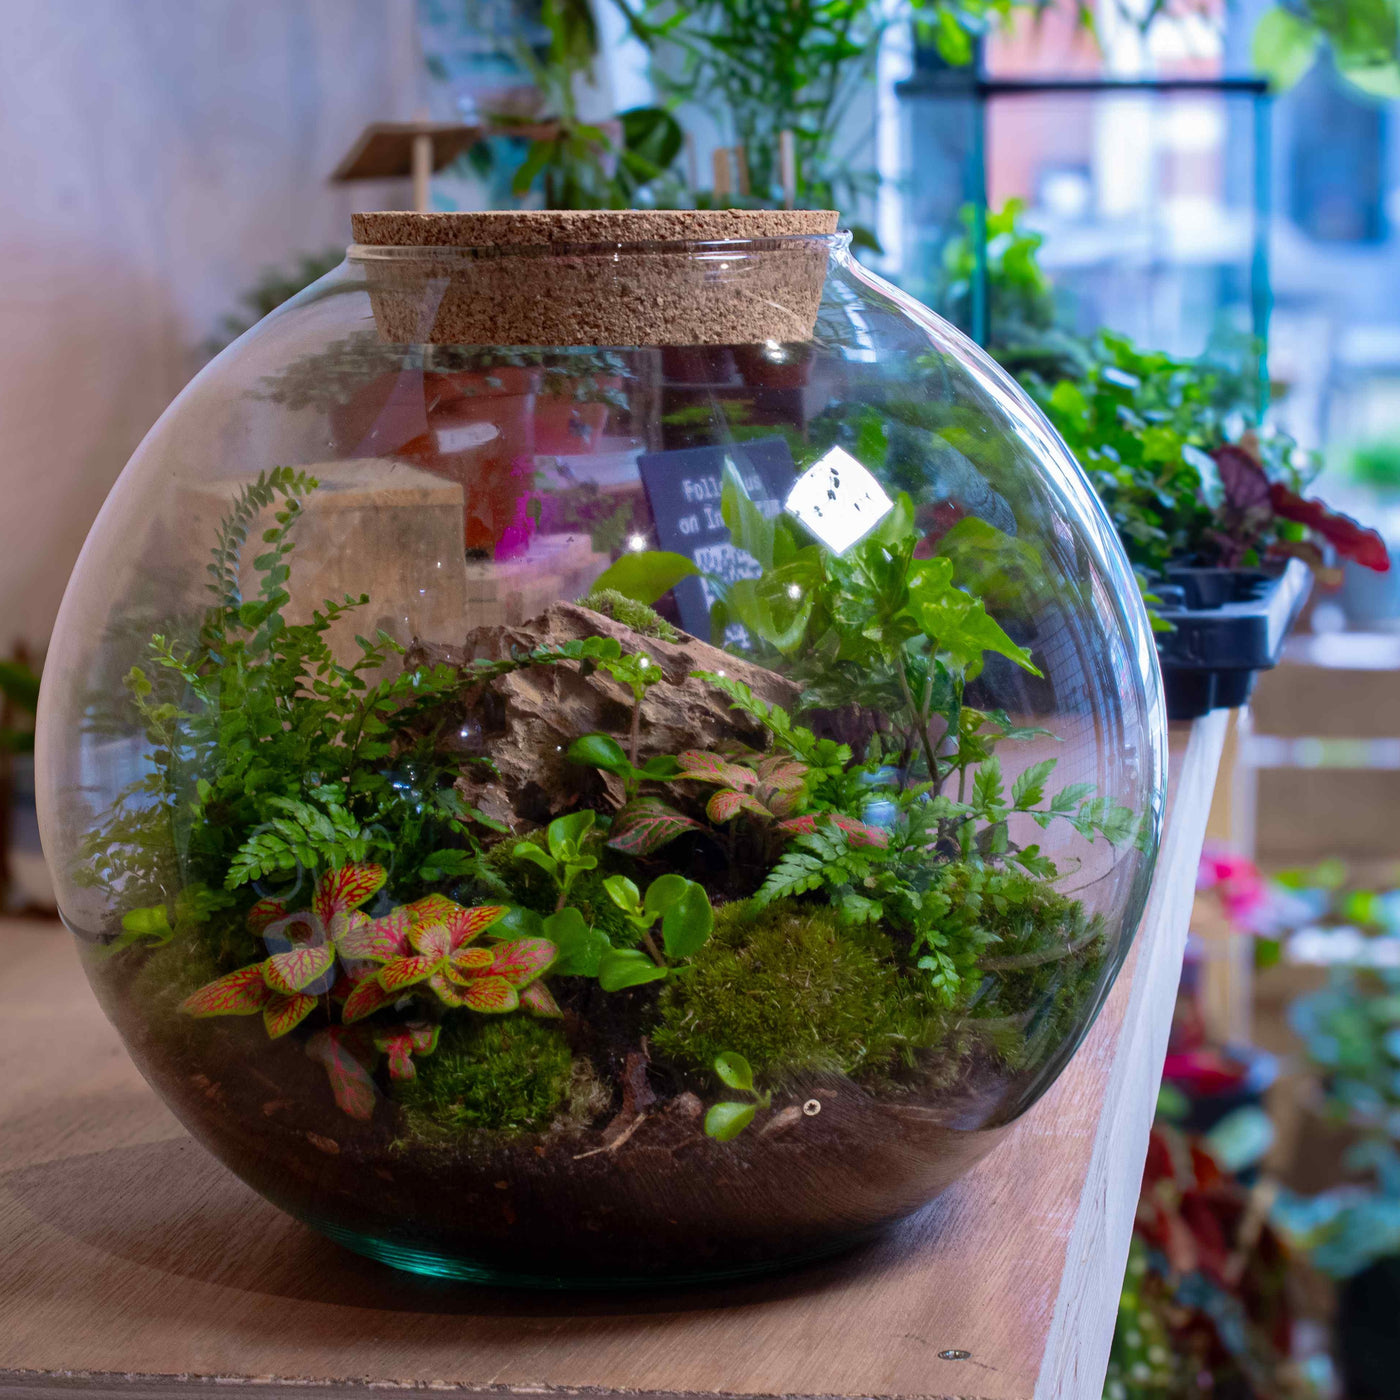 Premium large terrarium kit: Perfect for young adults seeking a unique and green gift.